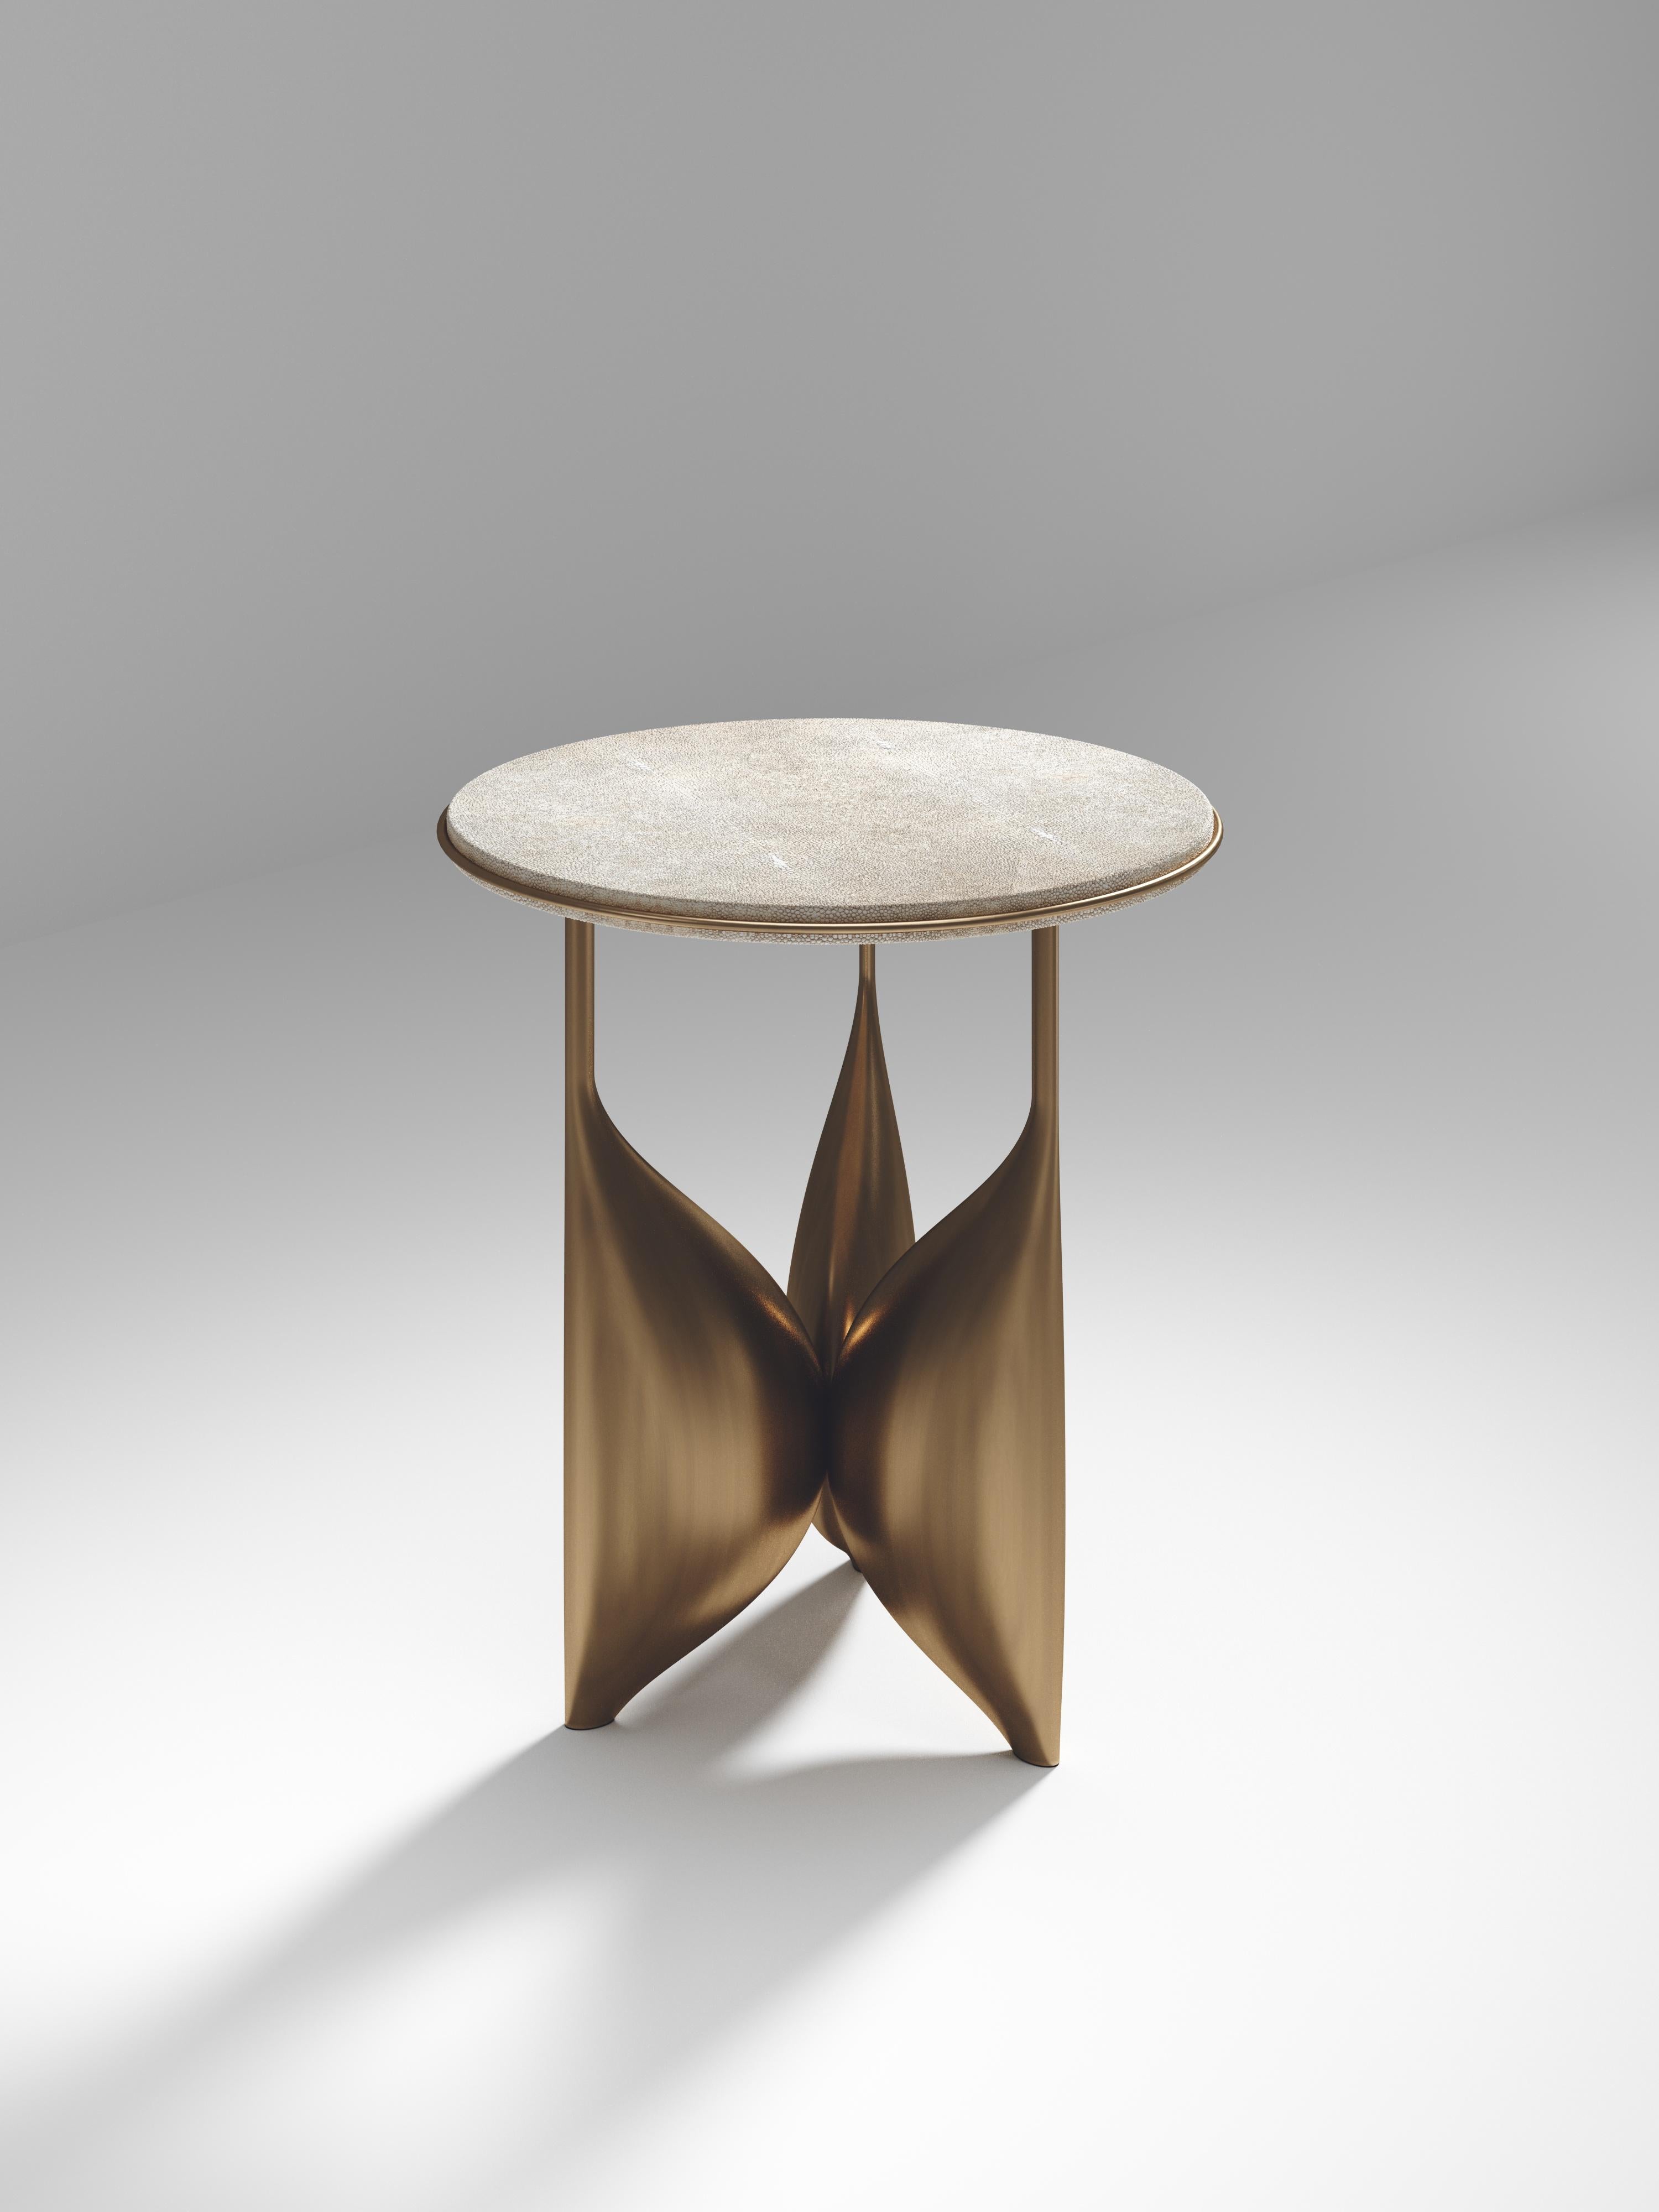 The Plumeria side table II by Kifu Paris is a dramatic and sculptural piece. The cream shagreen inlaid top sits on a sculptural bronze-patina brass base that is conceptually inspired by bird feathers floating on top of a lake. The border of the top